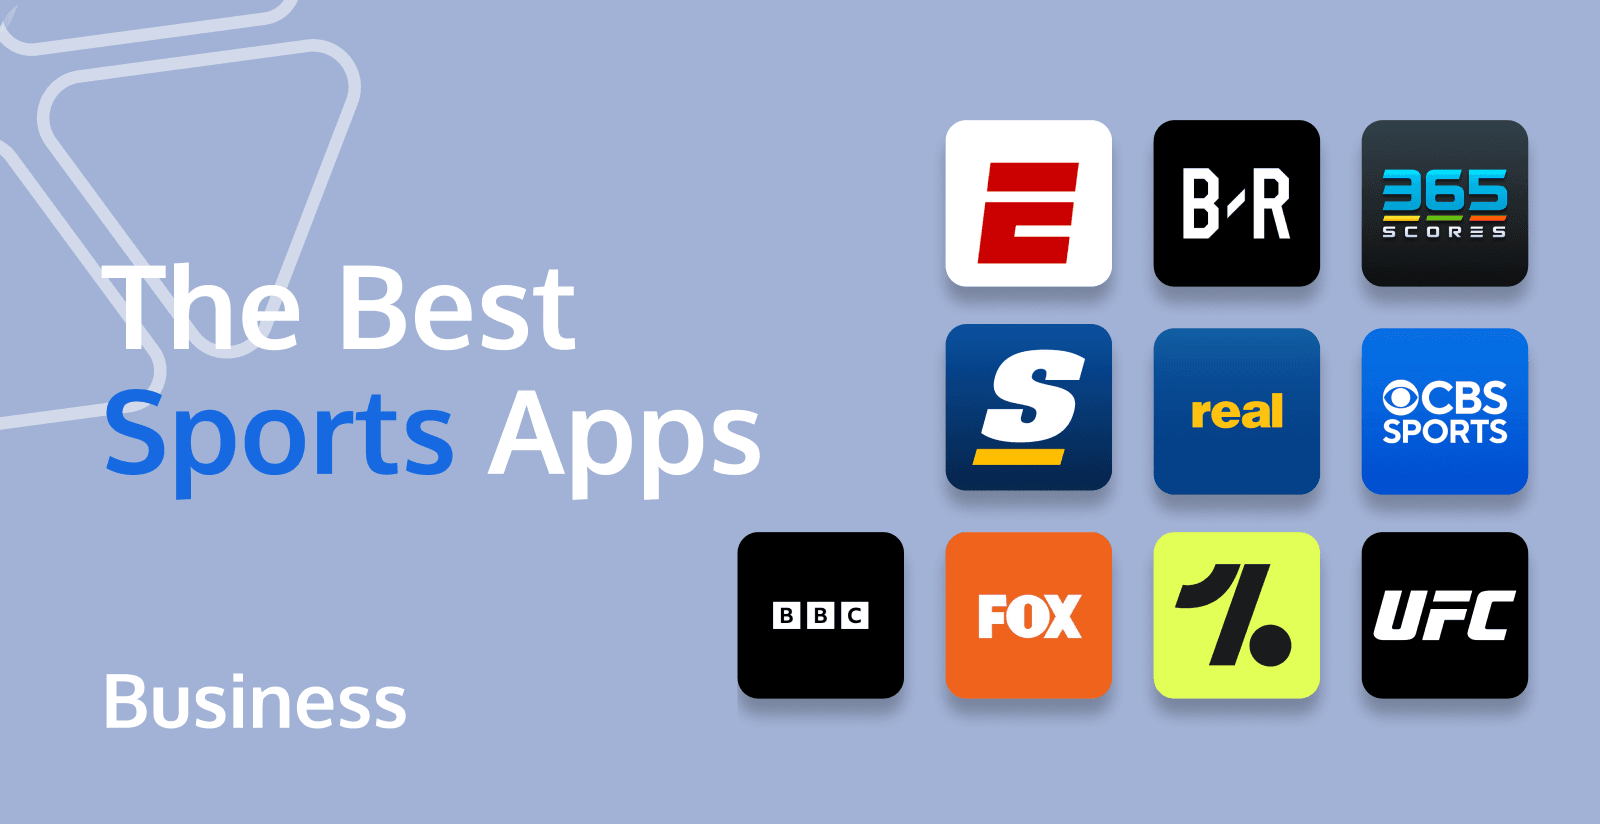 Ultimate Guide to Choosing the Best Sports App for Your Needs